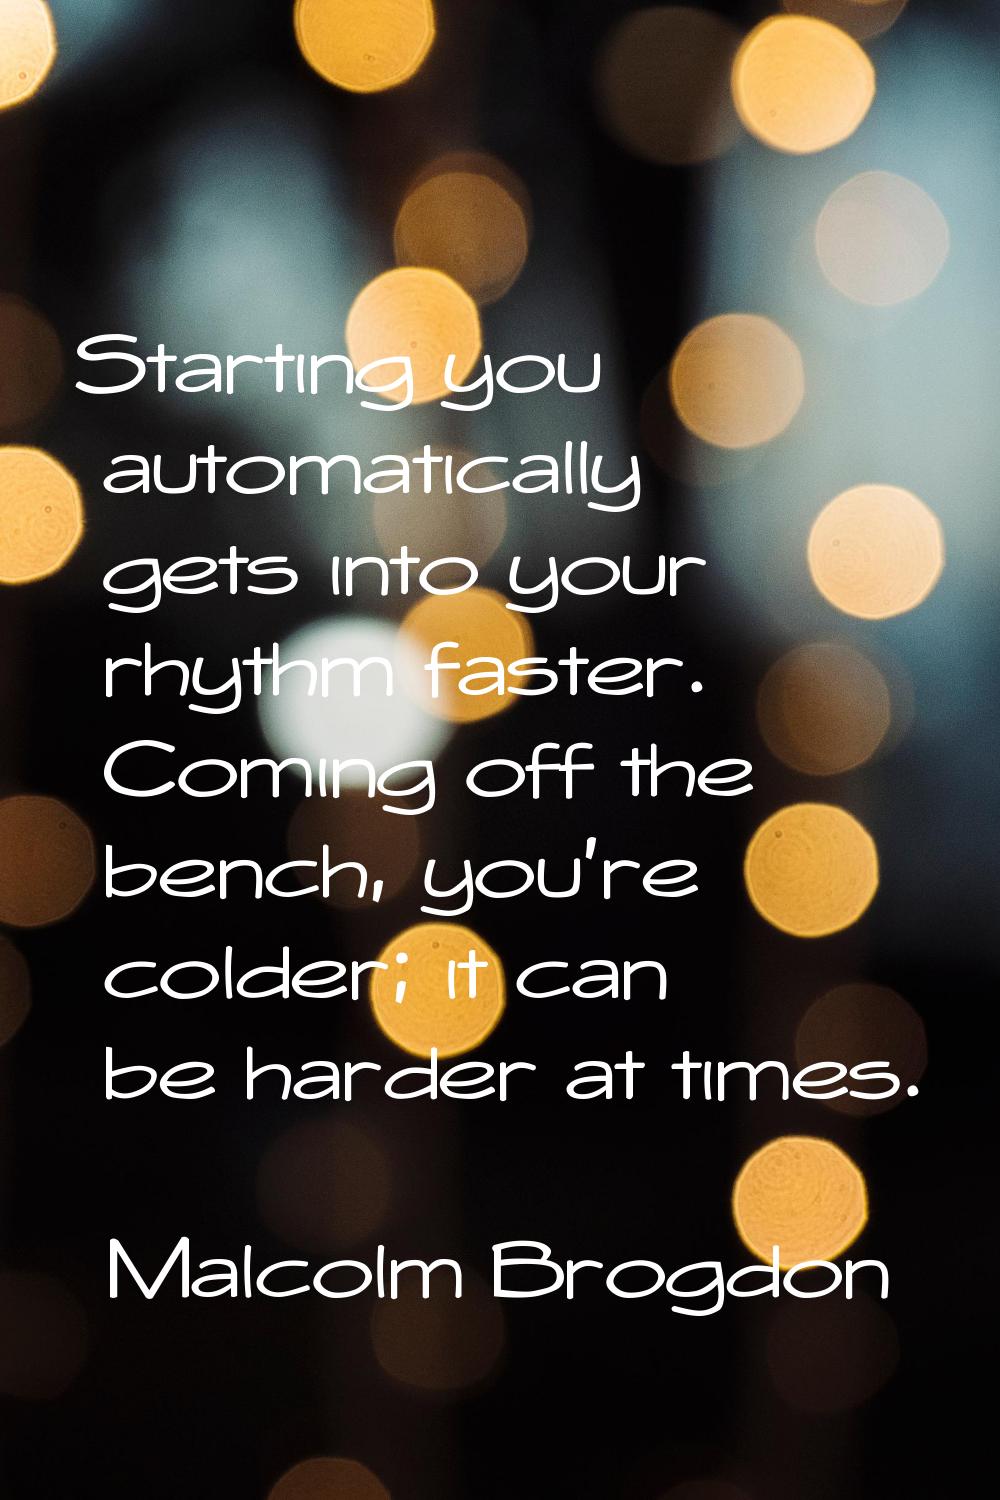 Starting you automatically gets into your rhythm faster. Coming off the bench, you're colder; it ca